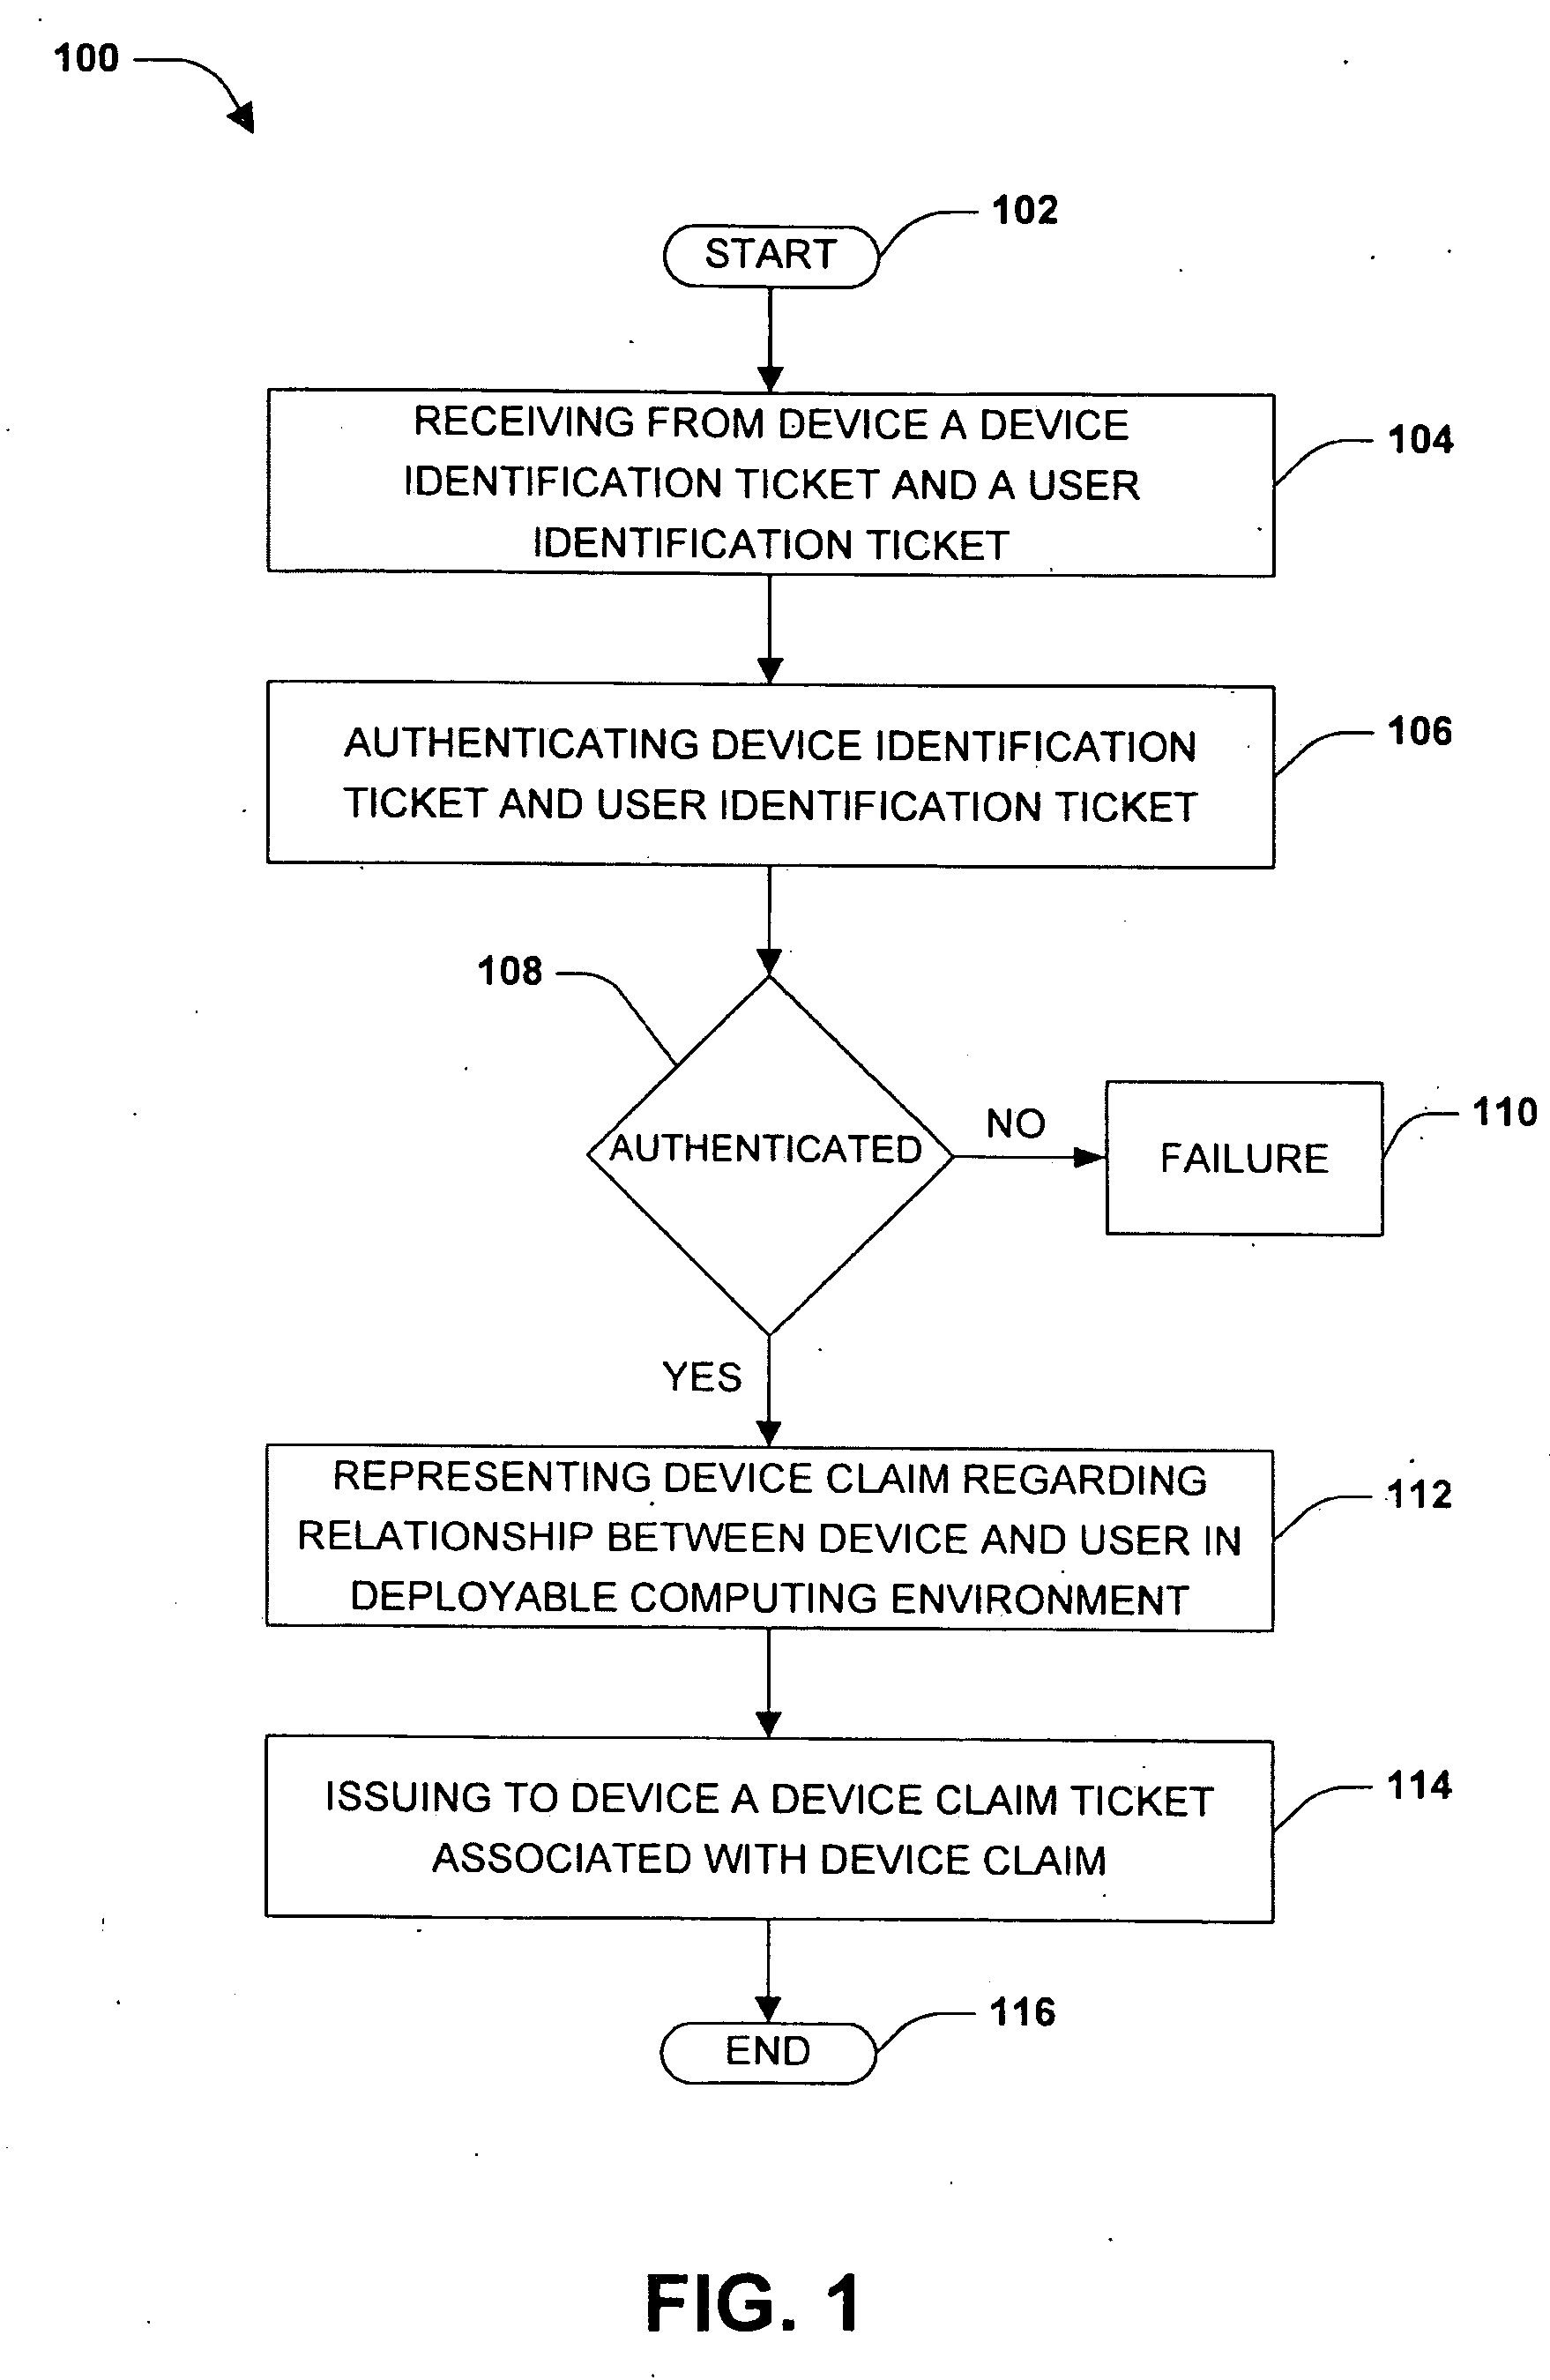 Device authentication within deployable computing environment